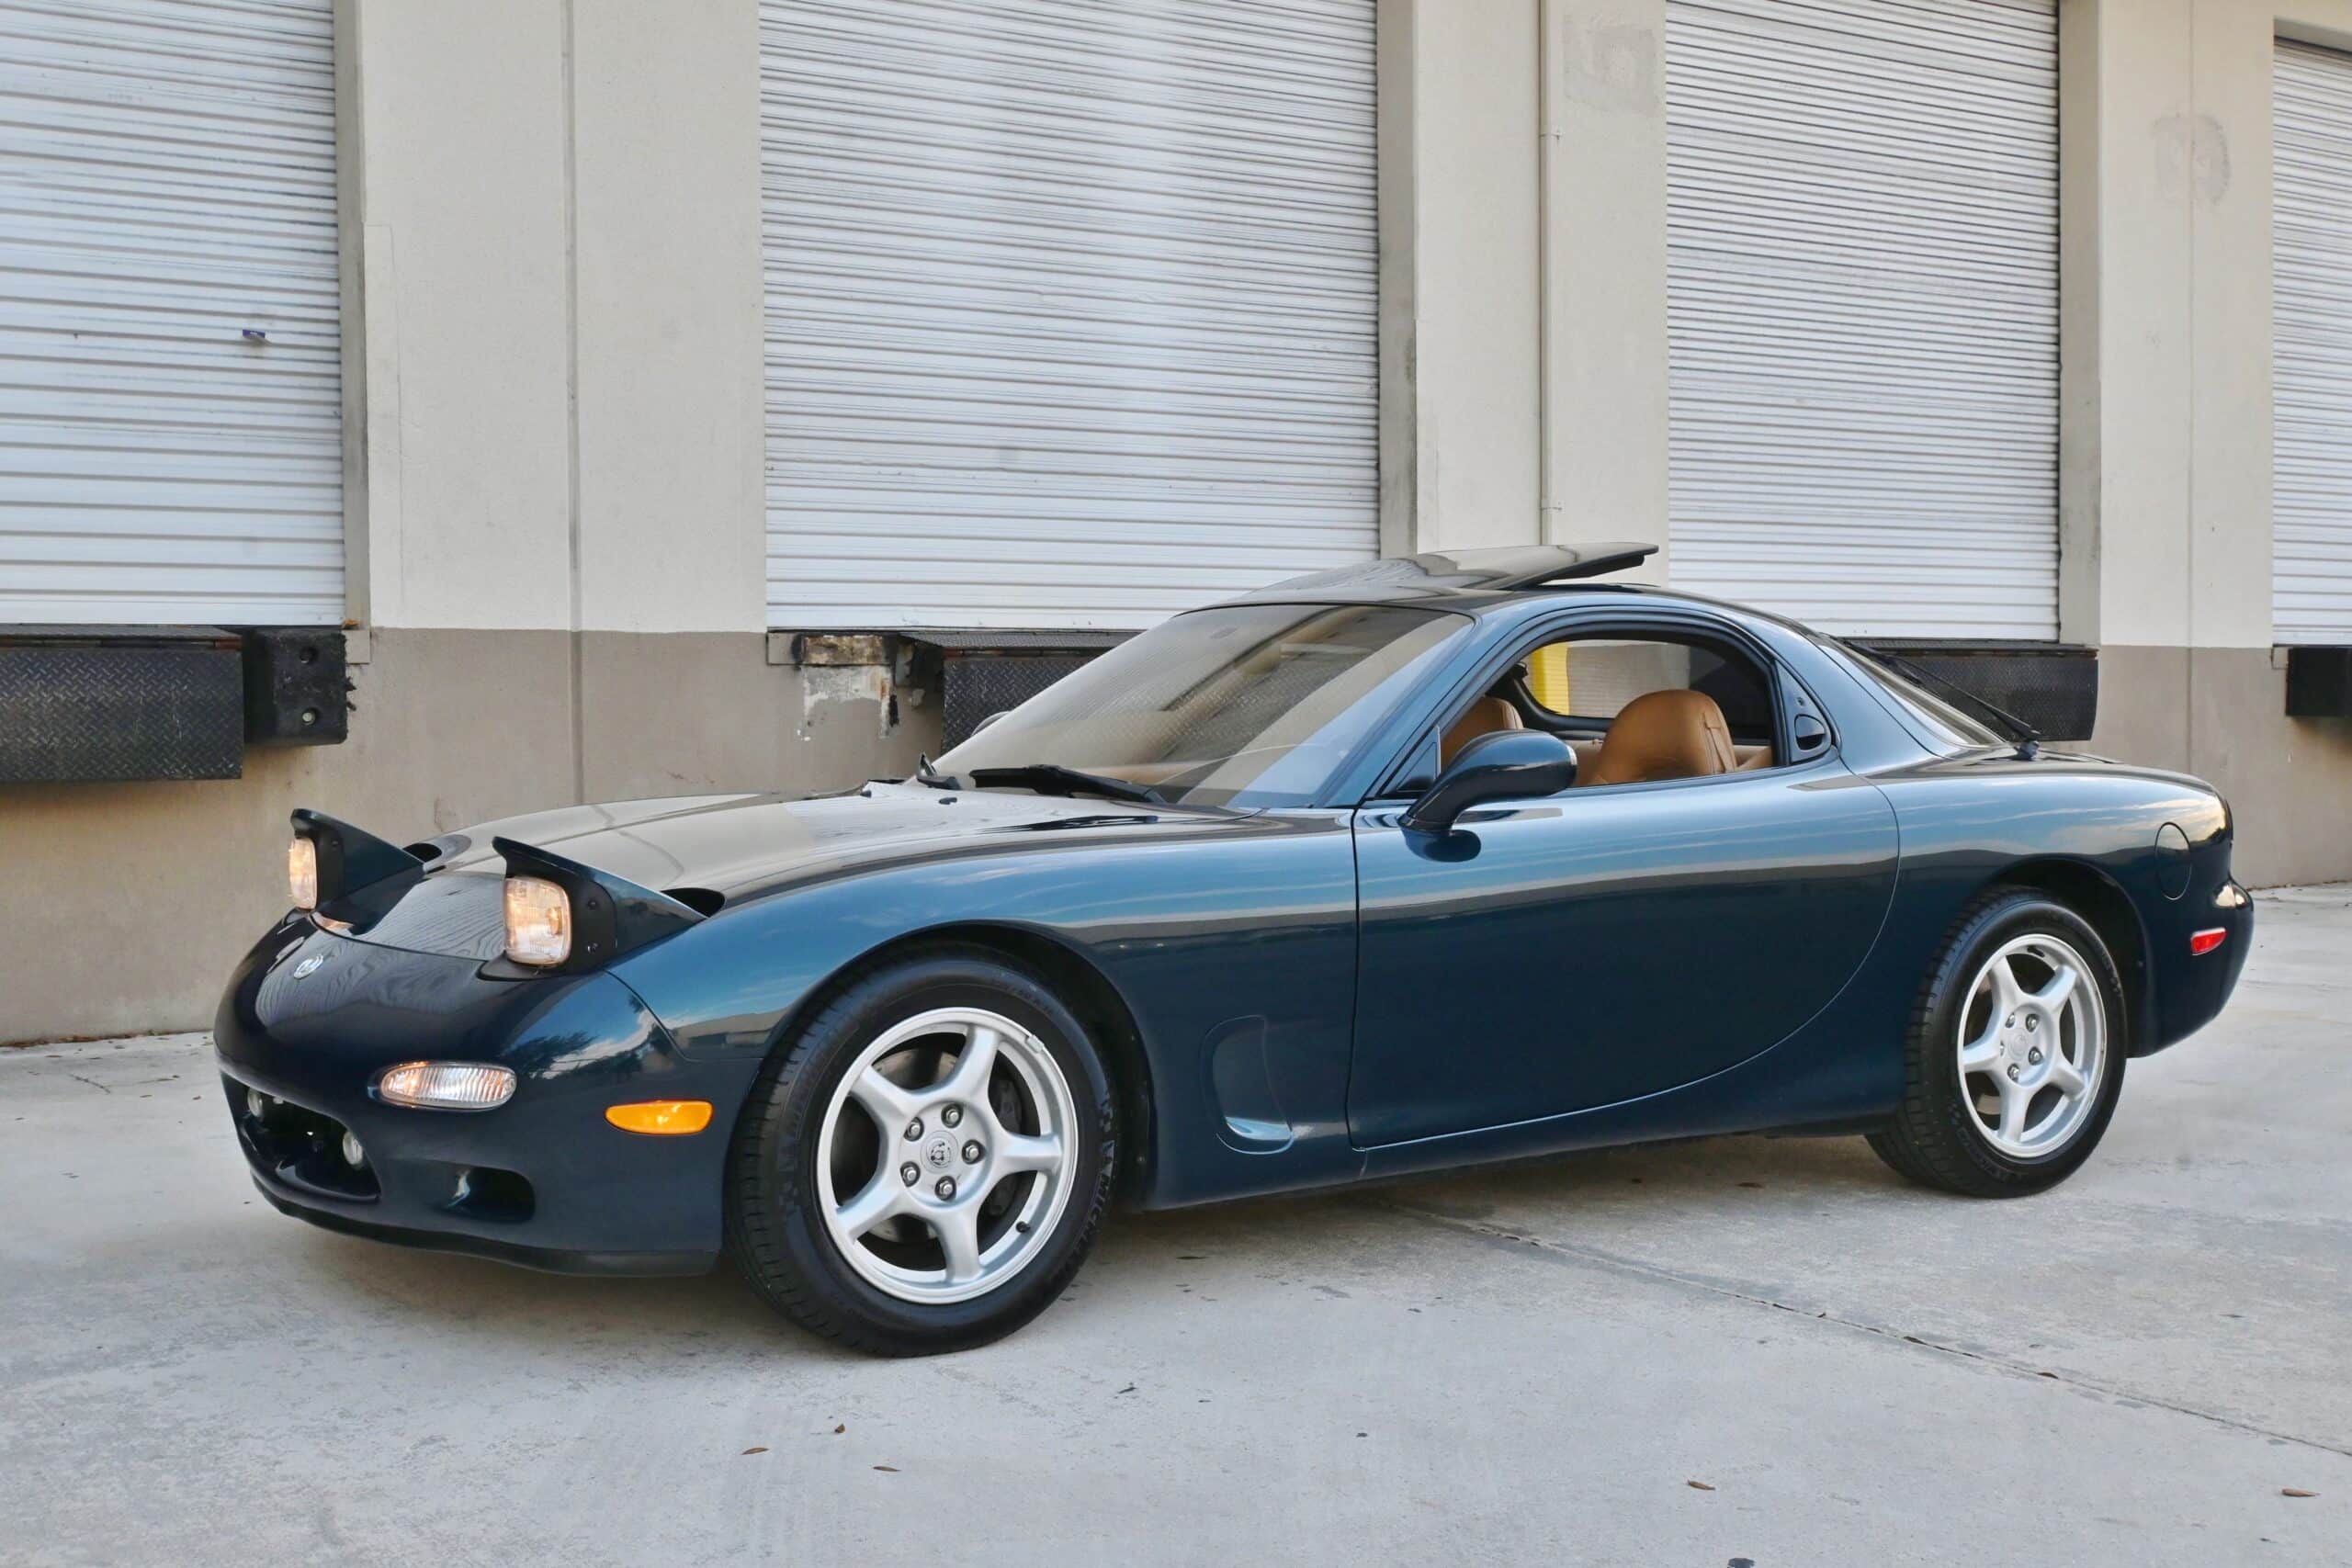 1993 Mazda RX-7 Turbo Original Montego Blue- Only 37K Miles- 5 Speed- Fresh Engine Reseal / New Clutch